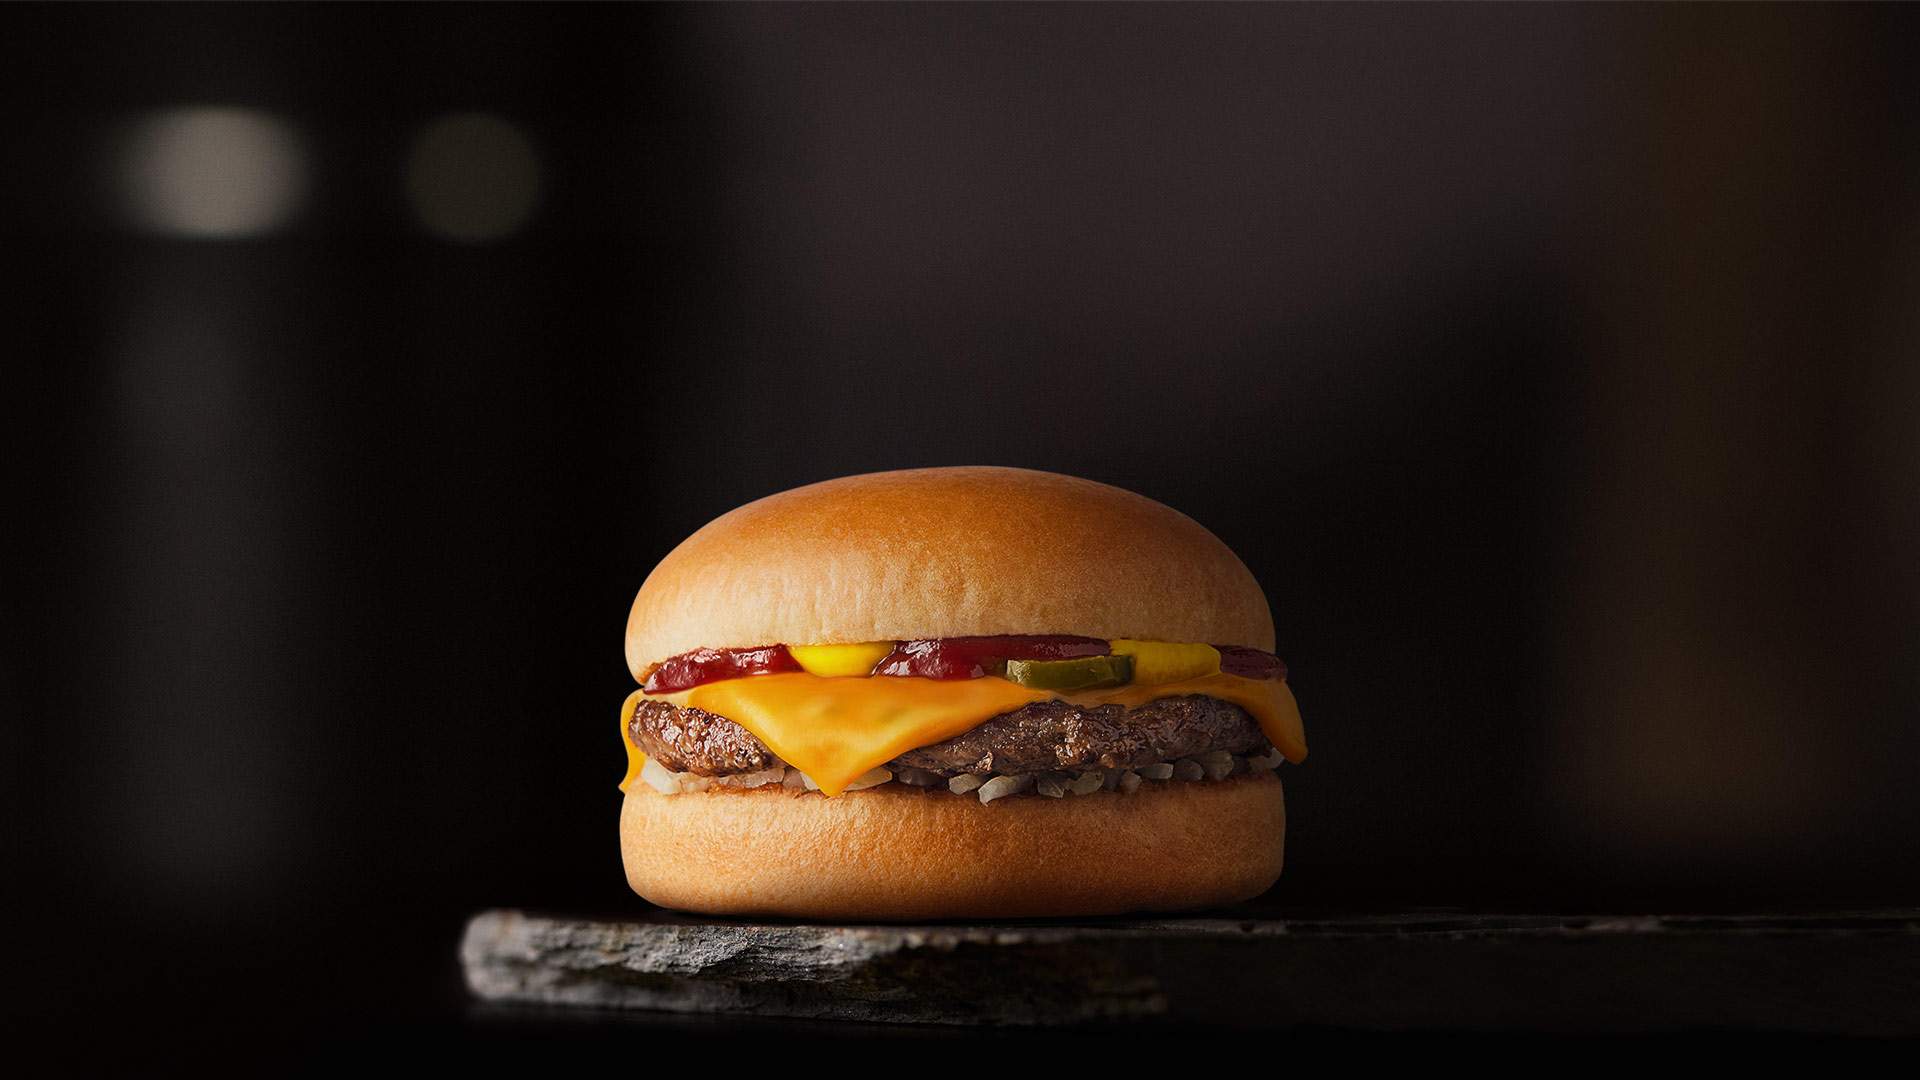 McDonald's Is Dishing Up 350,000 50-Cent Cheeseburgers for One Day Only